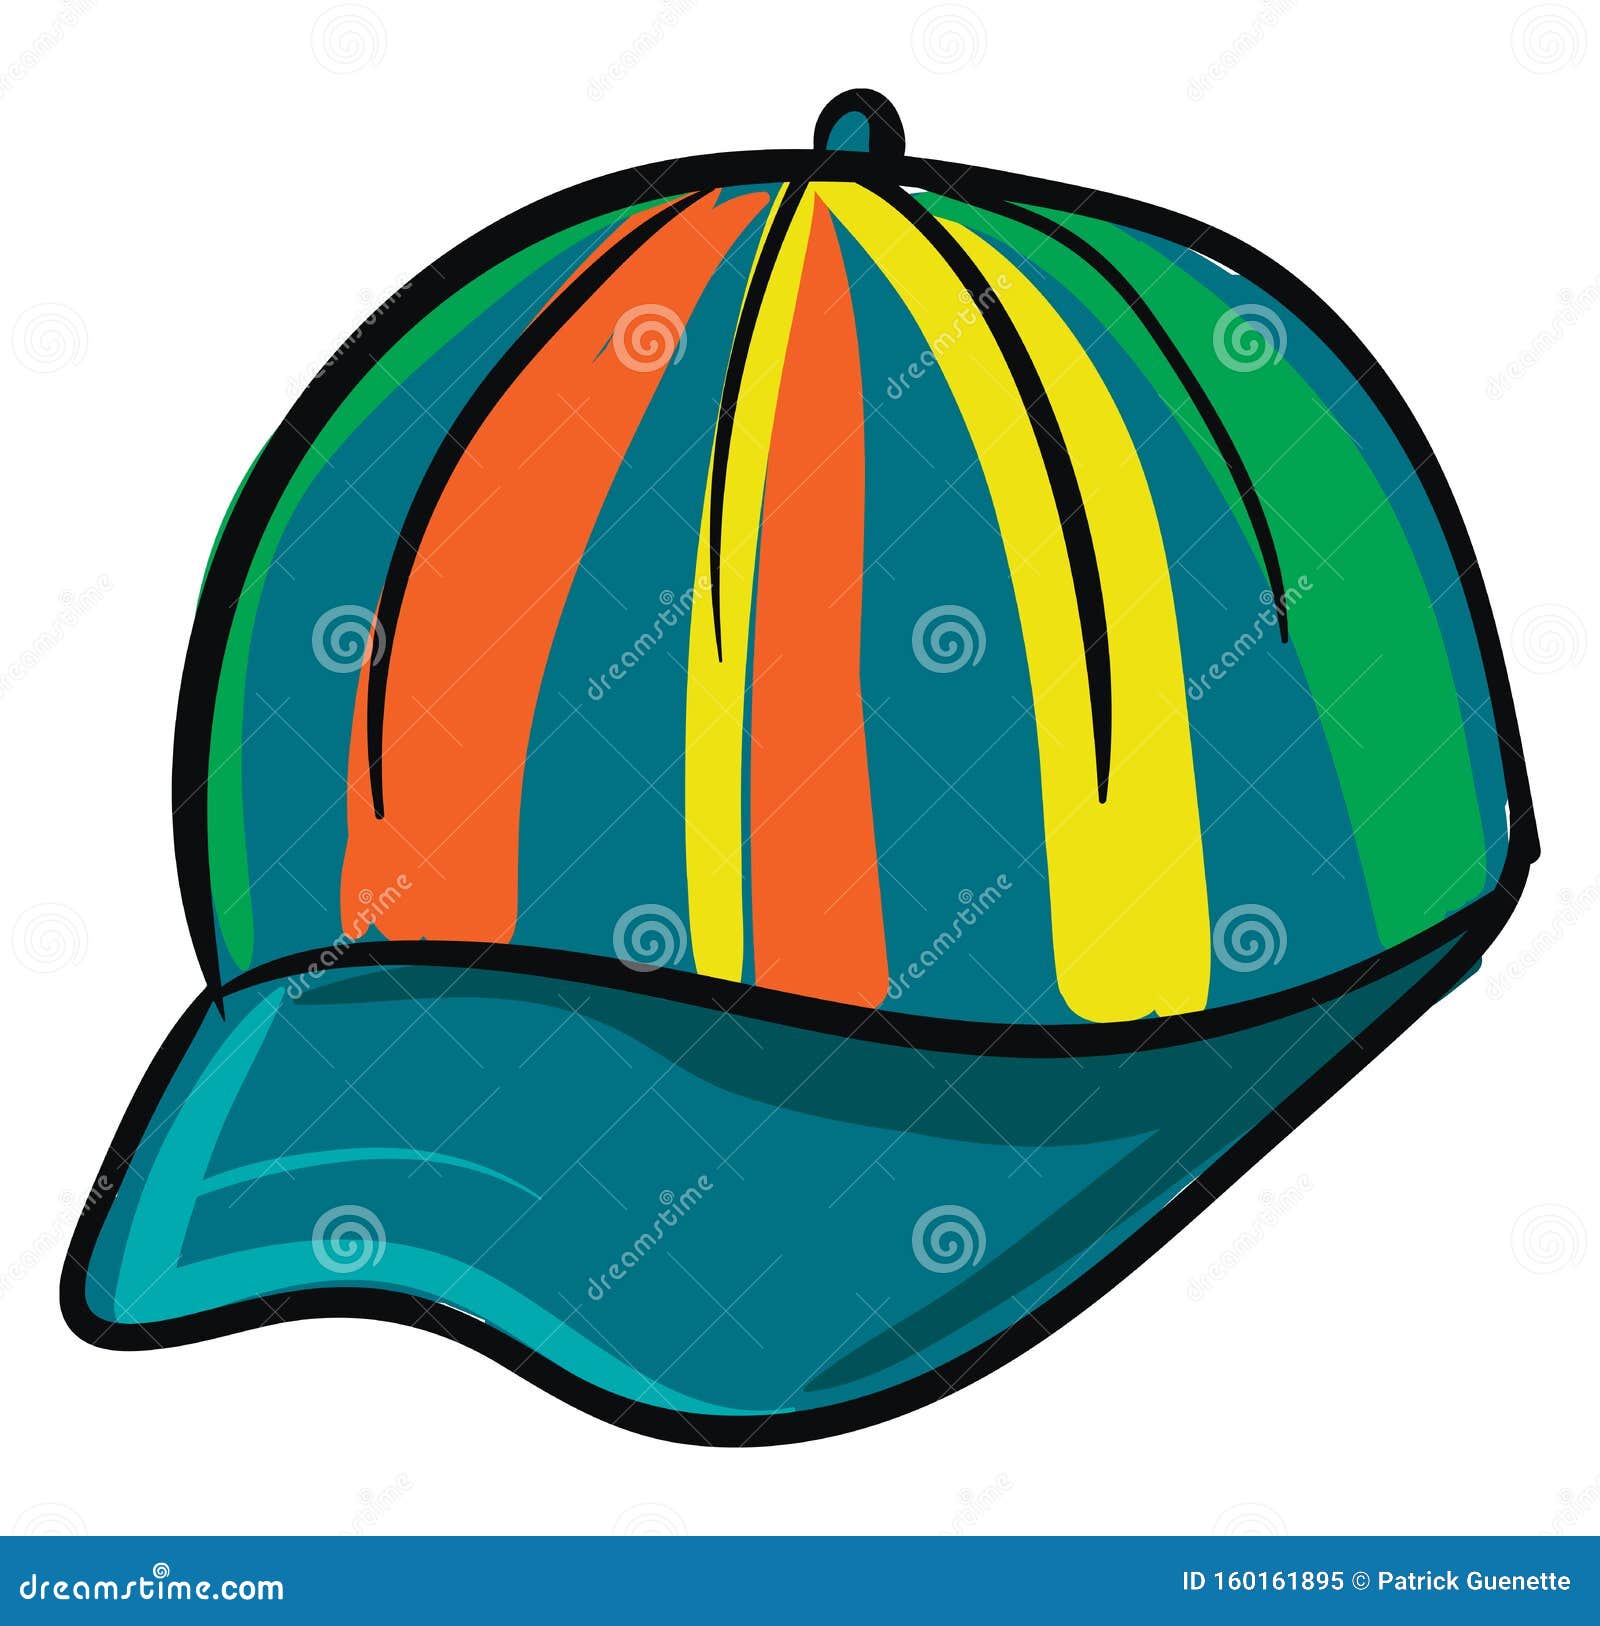 https://thumbs.dreamstime.com/z/fashionable-multi-colored-hat-outdoor-adventures-workout-routines-provides-finishing-look-to-holiday-outfits-160161895.jpg